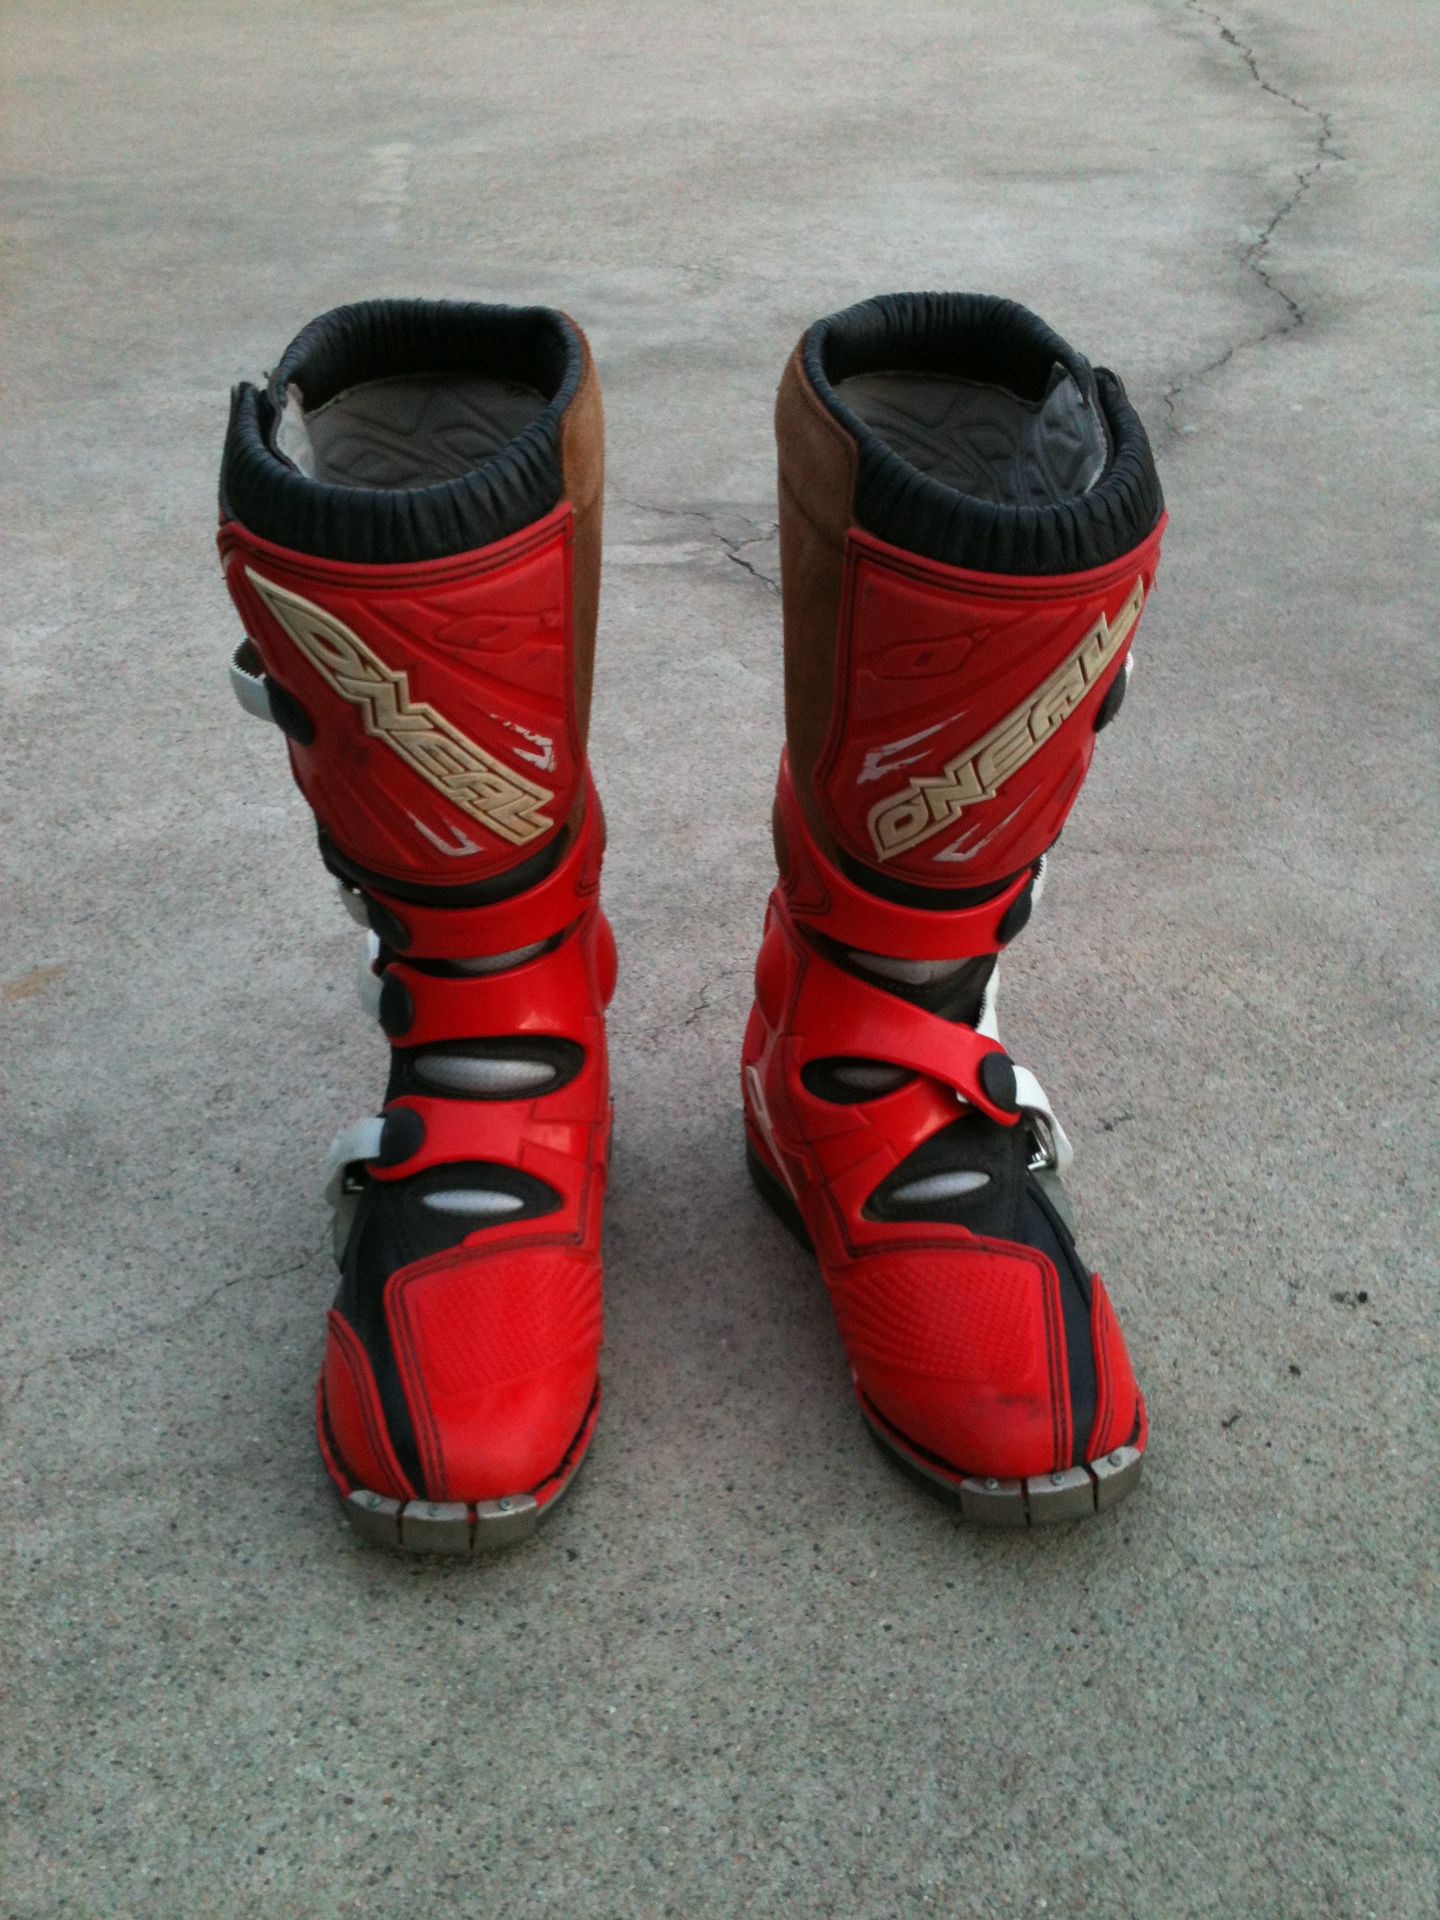 O’NEIL racing motocross boots size 8 Youth